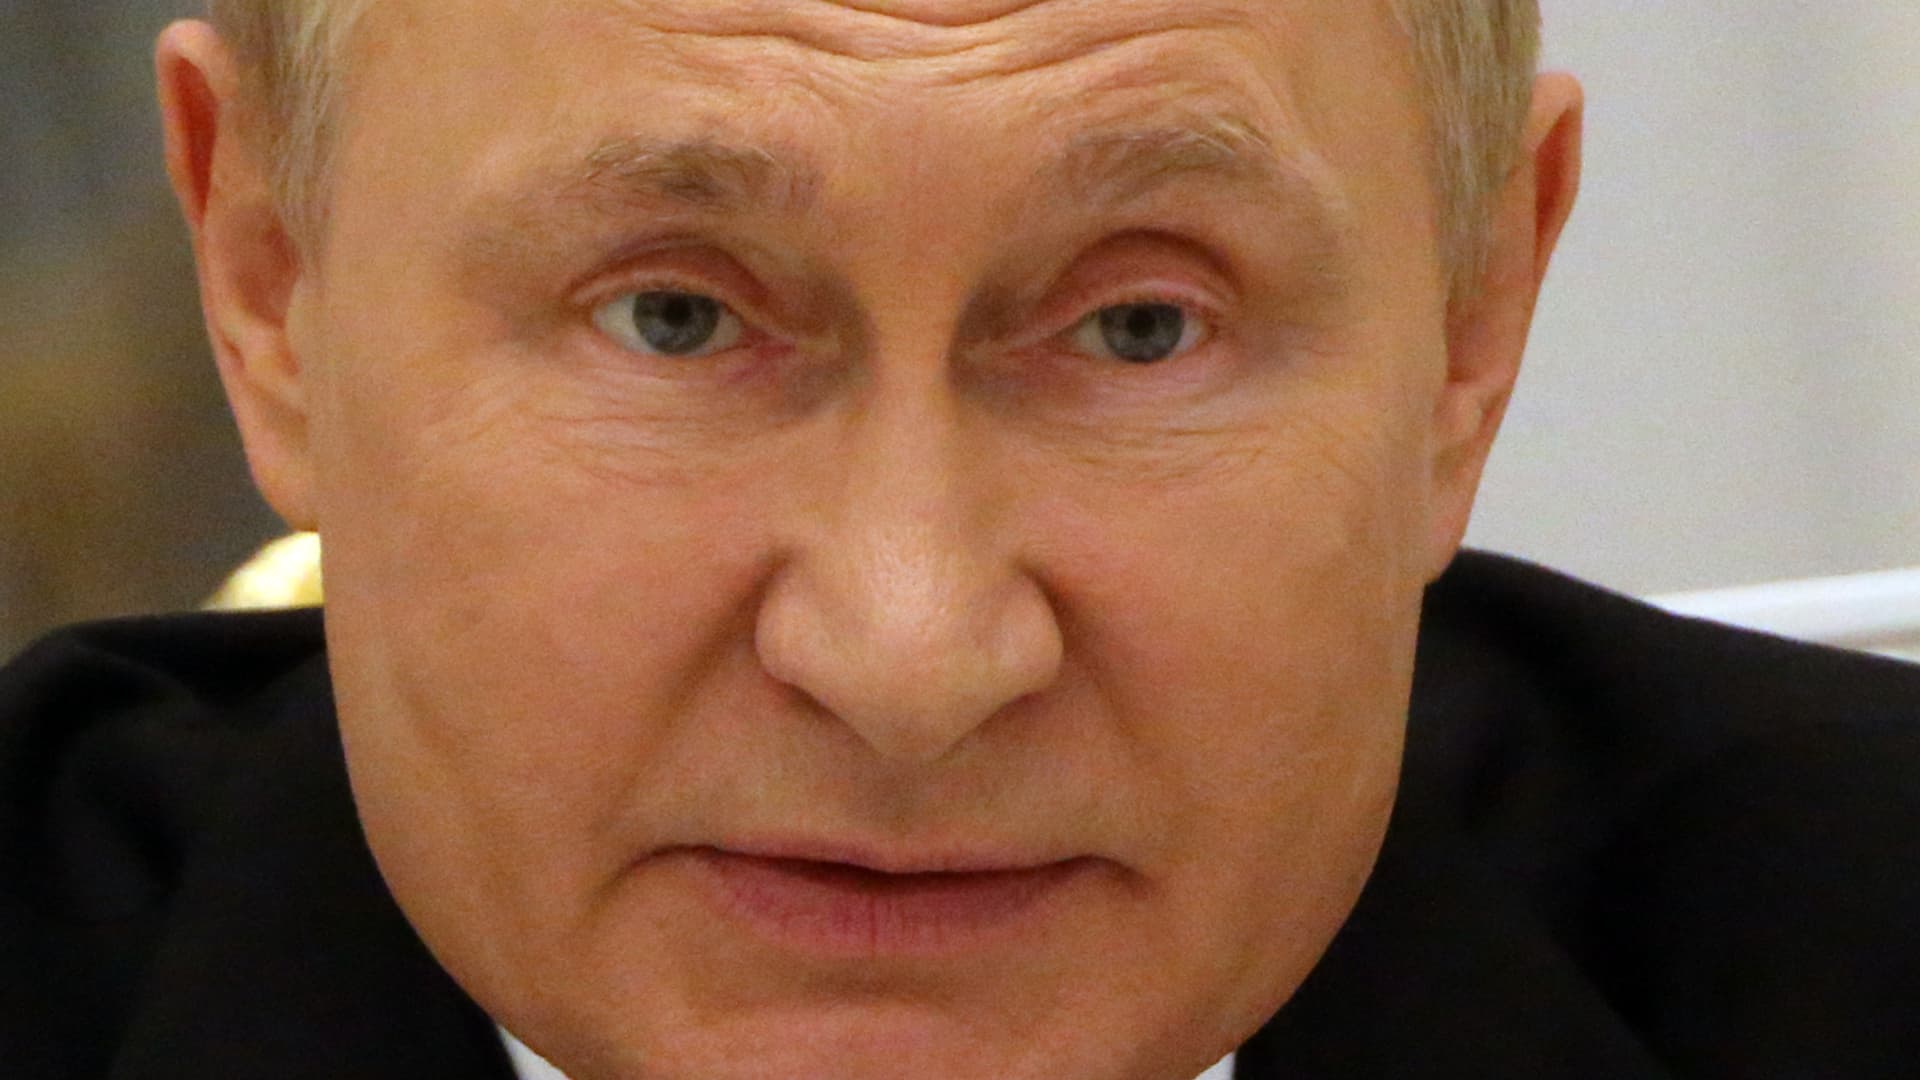 Putin mobilizes 300,000 troops for war in Ukraine and warns he's not bluffing with nuclear threat